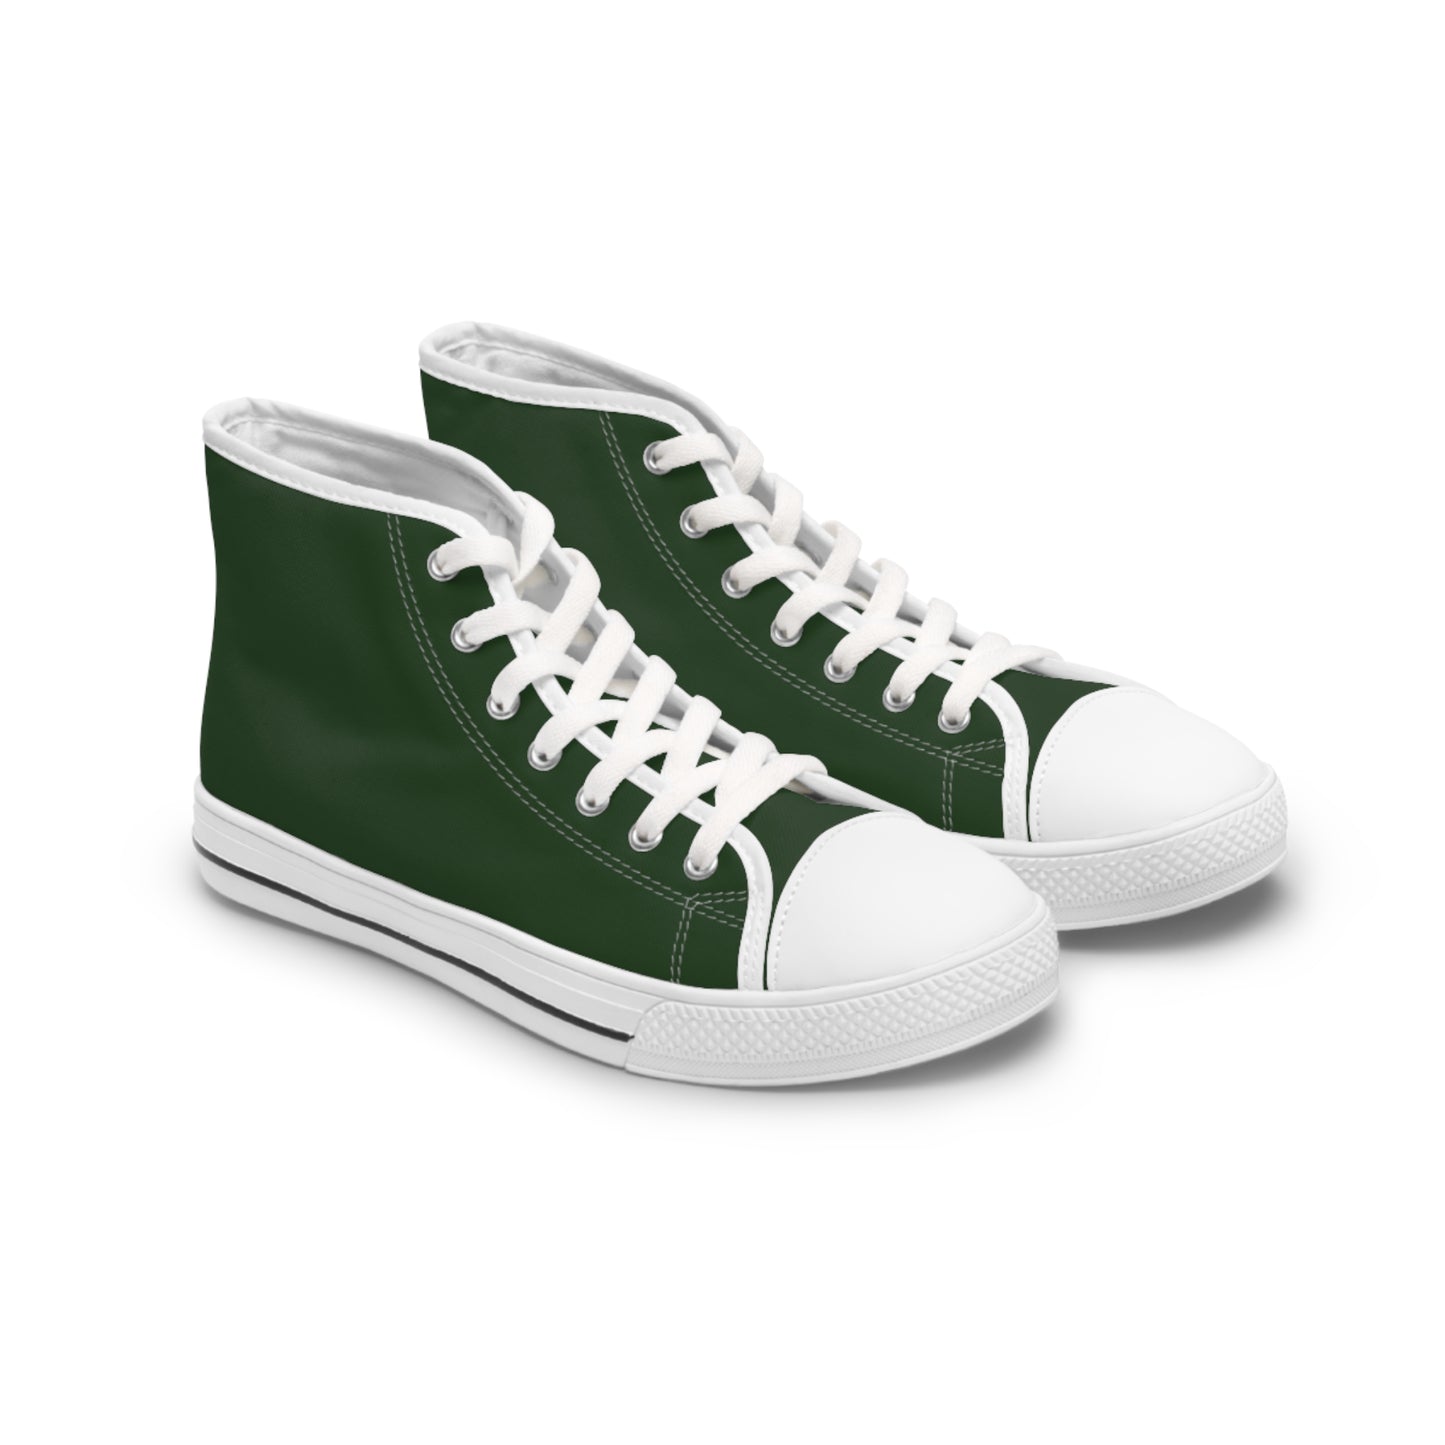 Women's Canvas High Top Solid Color Sneakers - Hunter Green US 12 White sole